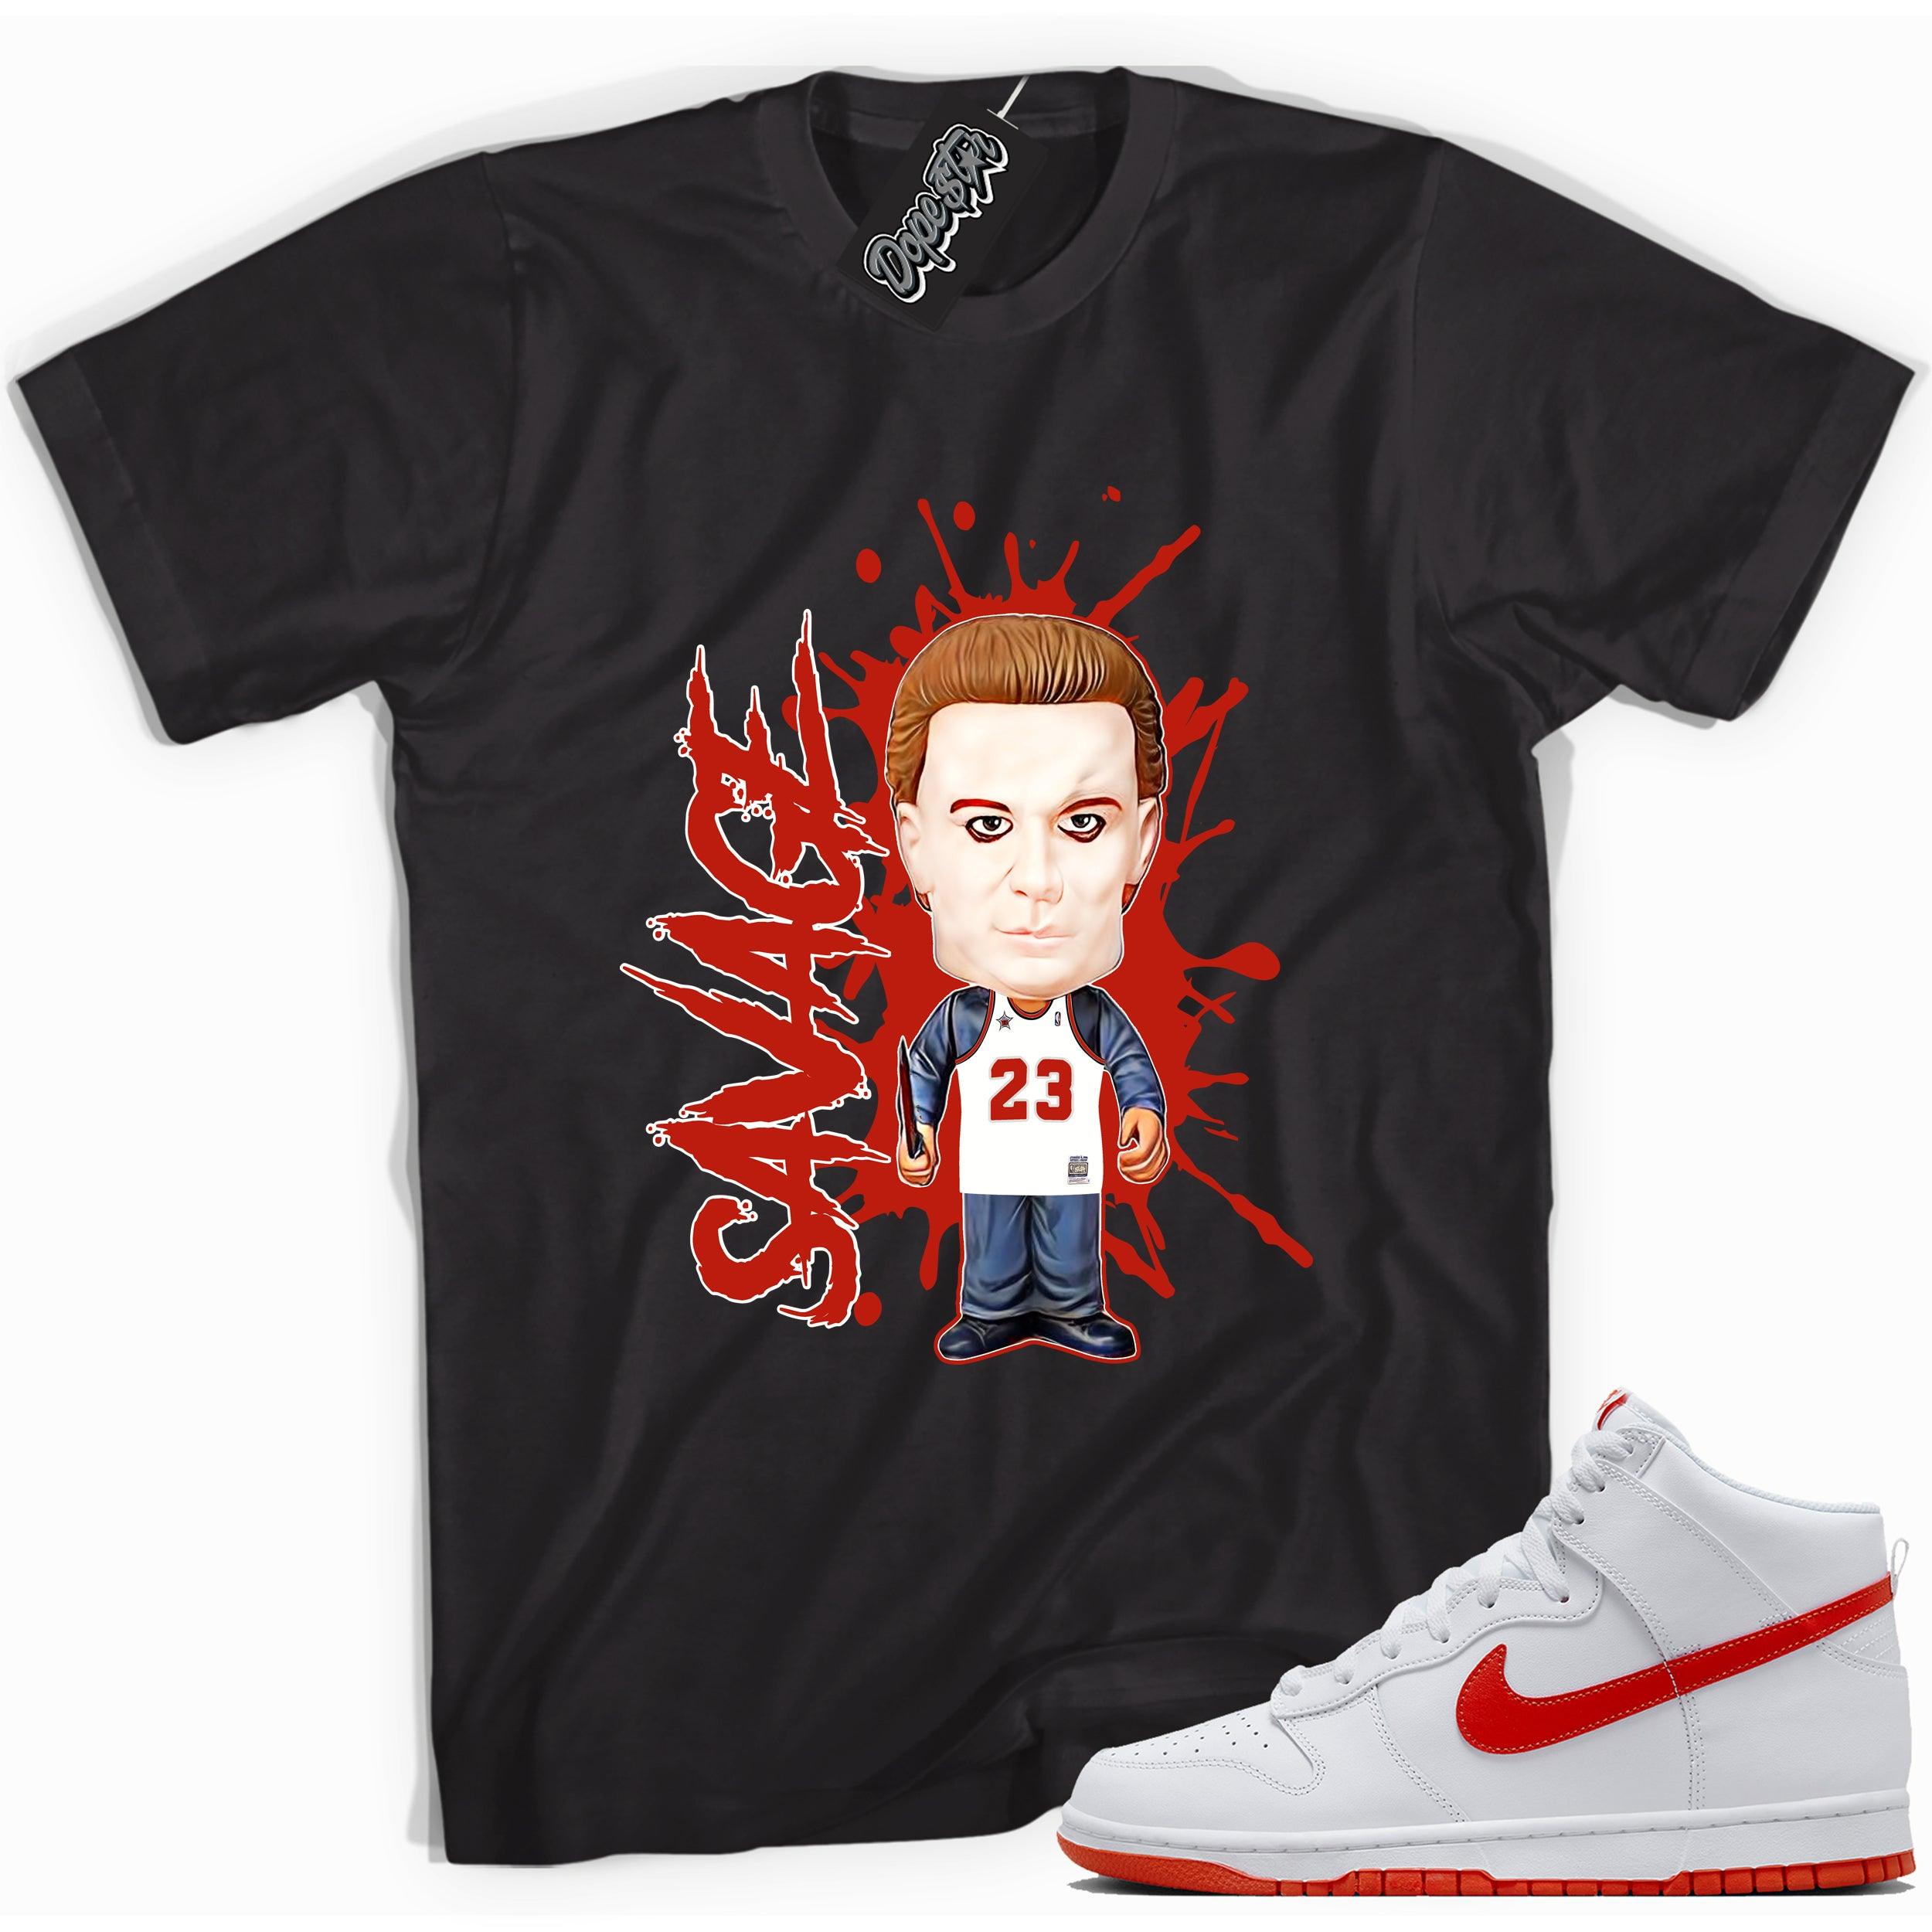 Cool black graphic tee with 'savage' print, that perfectly matches Nike Dunk High White Picante Red sneakers.